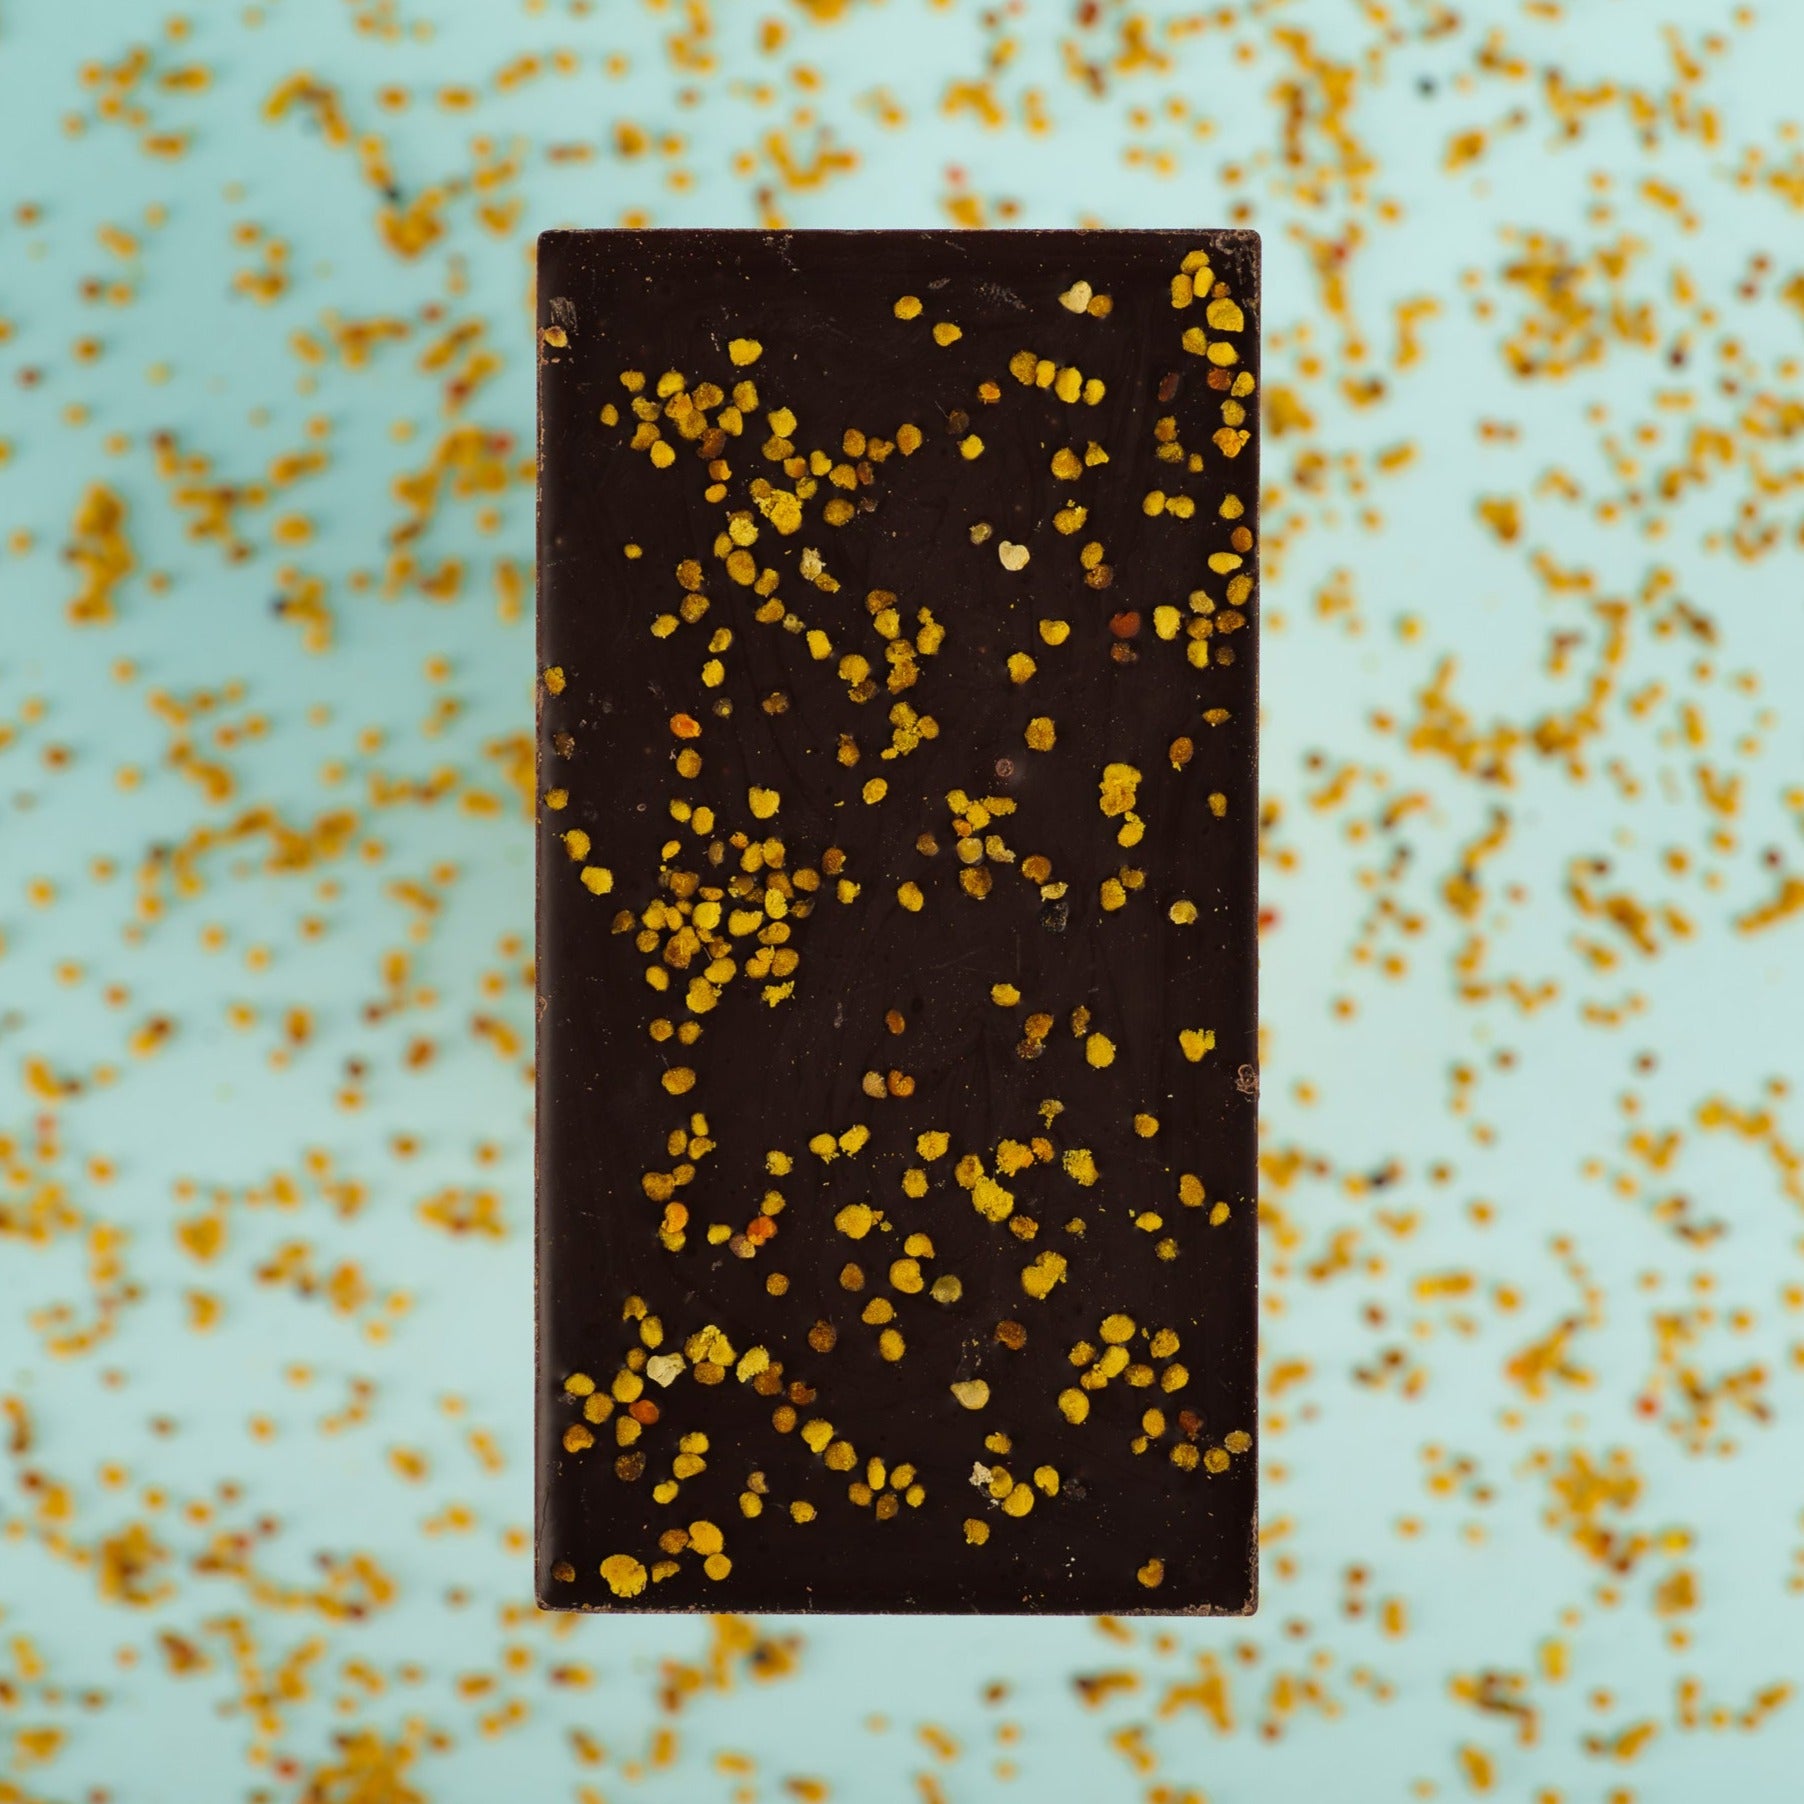 lilac dark chocolate bar lies on a bed of bee pollen with the backside of the bar showing the sprinkle of bee pollen